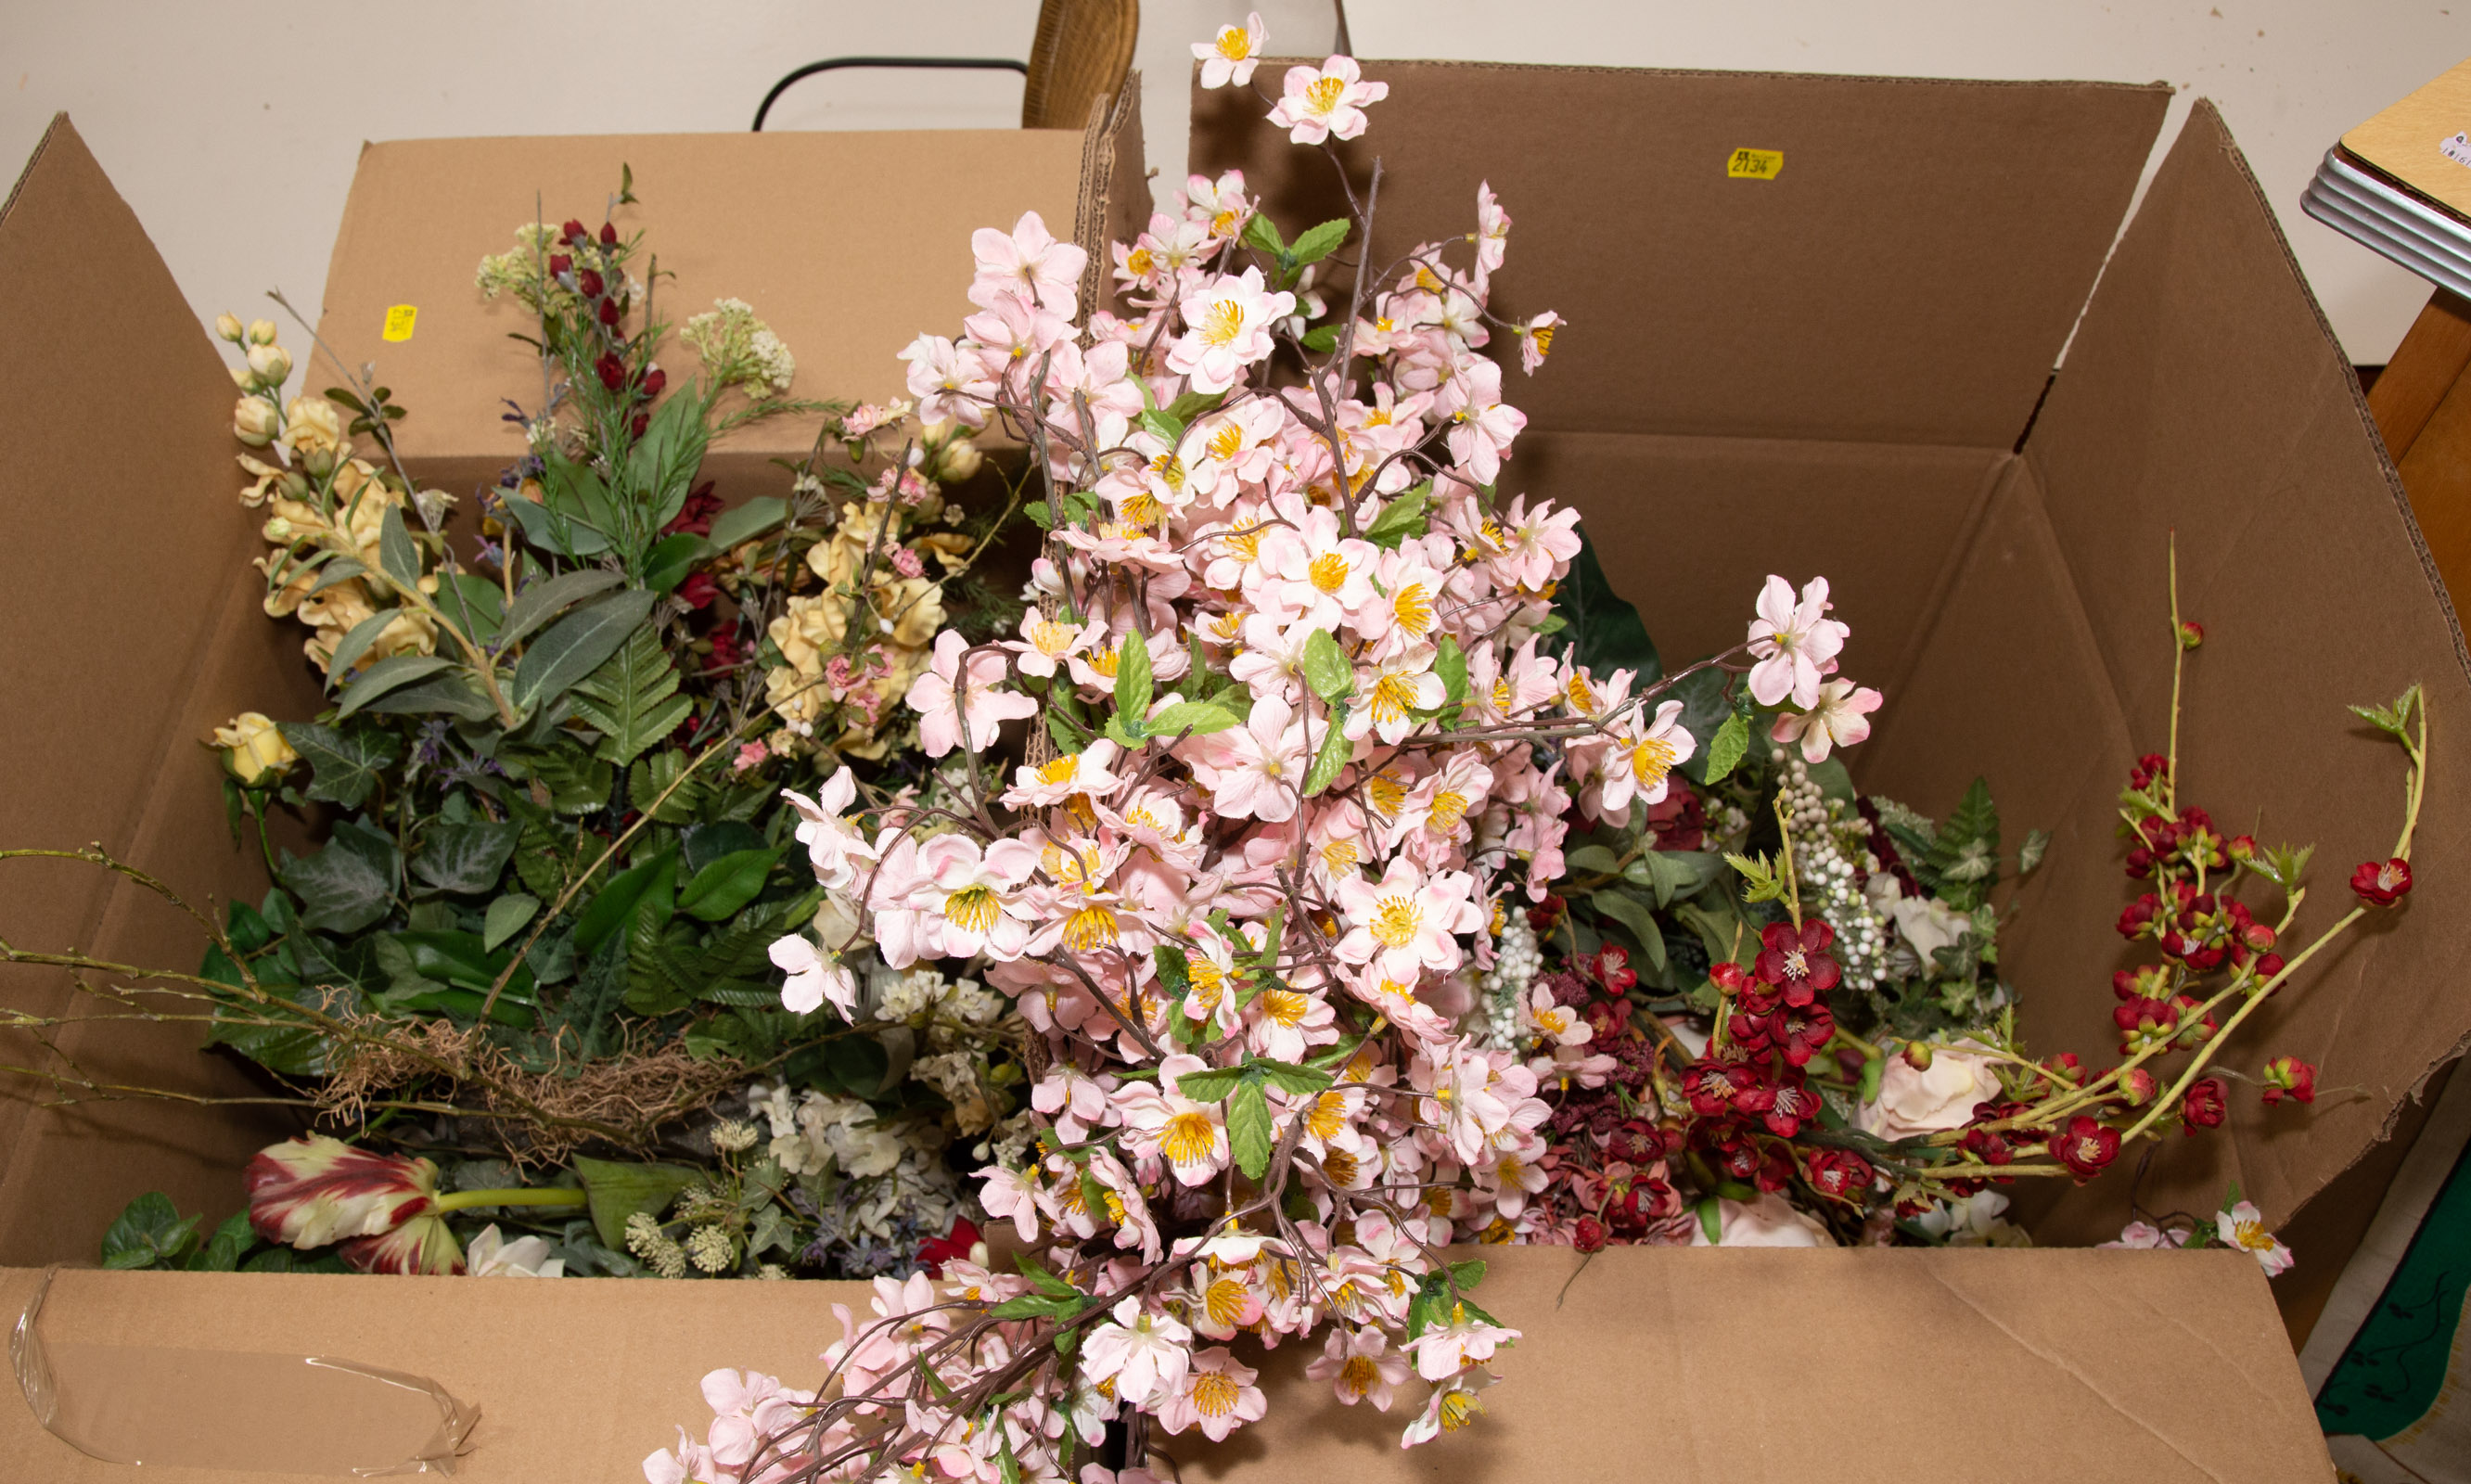 TWO LARGE BOXES OF ARTIFICIAL FLORAL